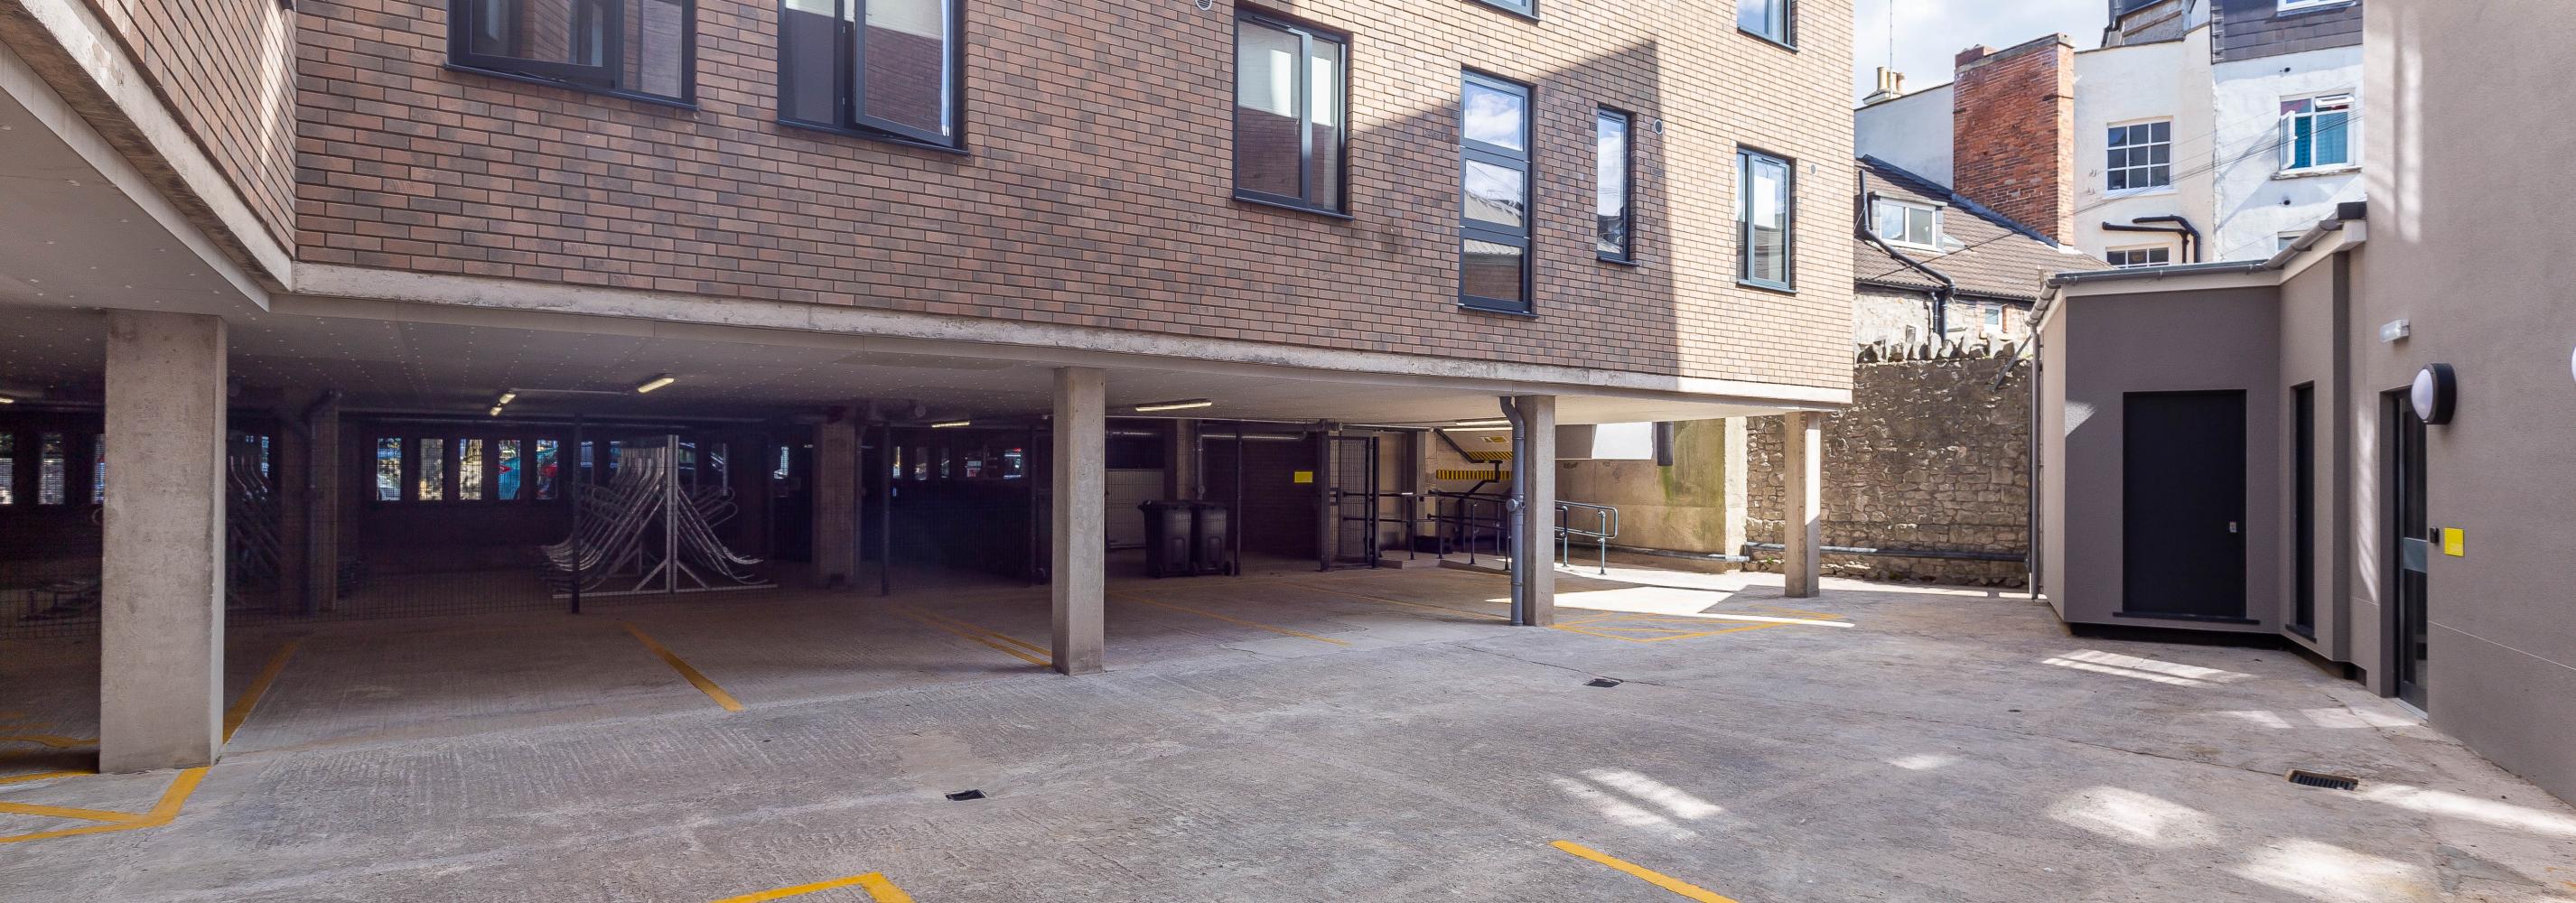 Courtyard Accessible Parking